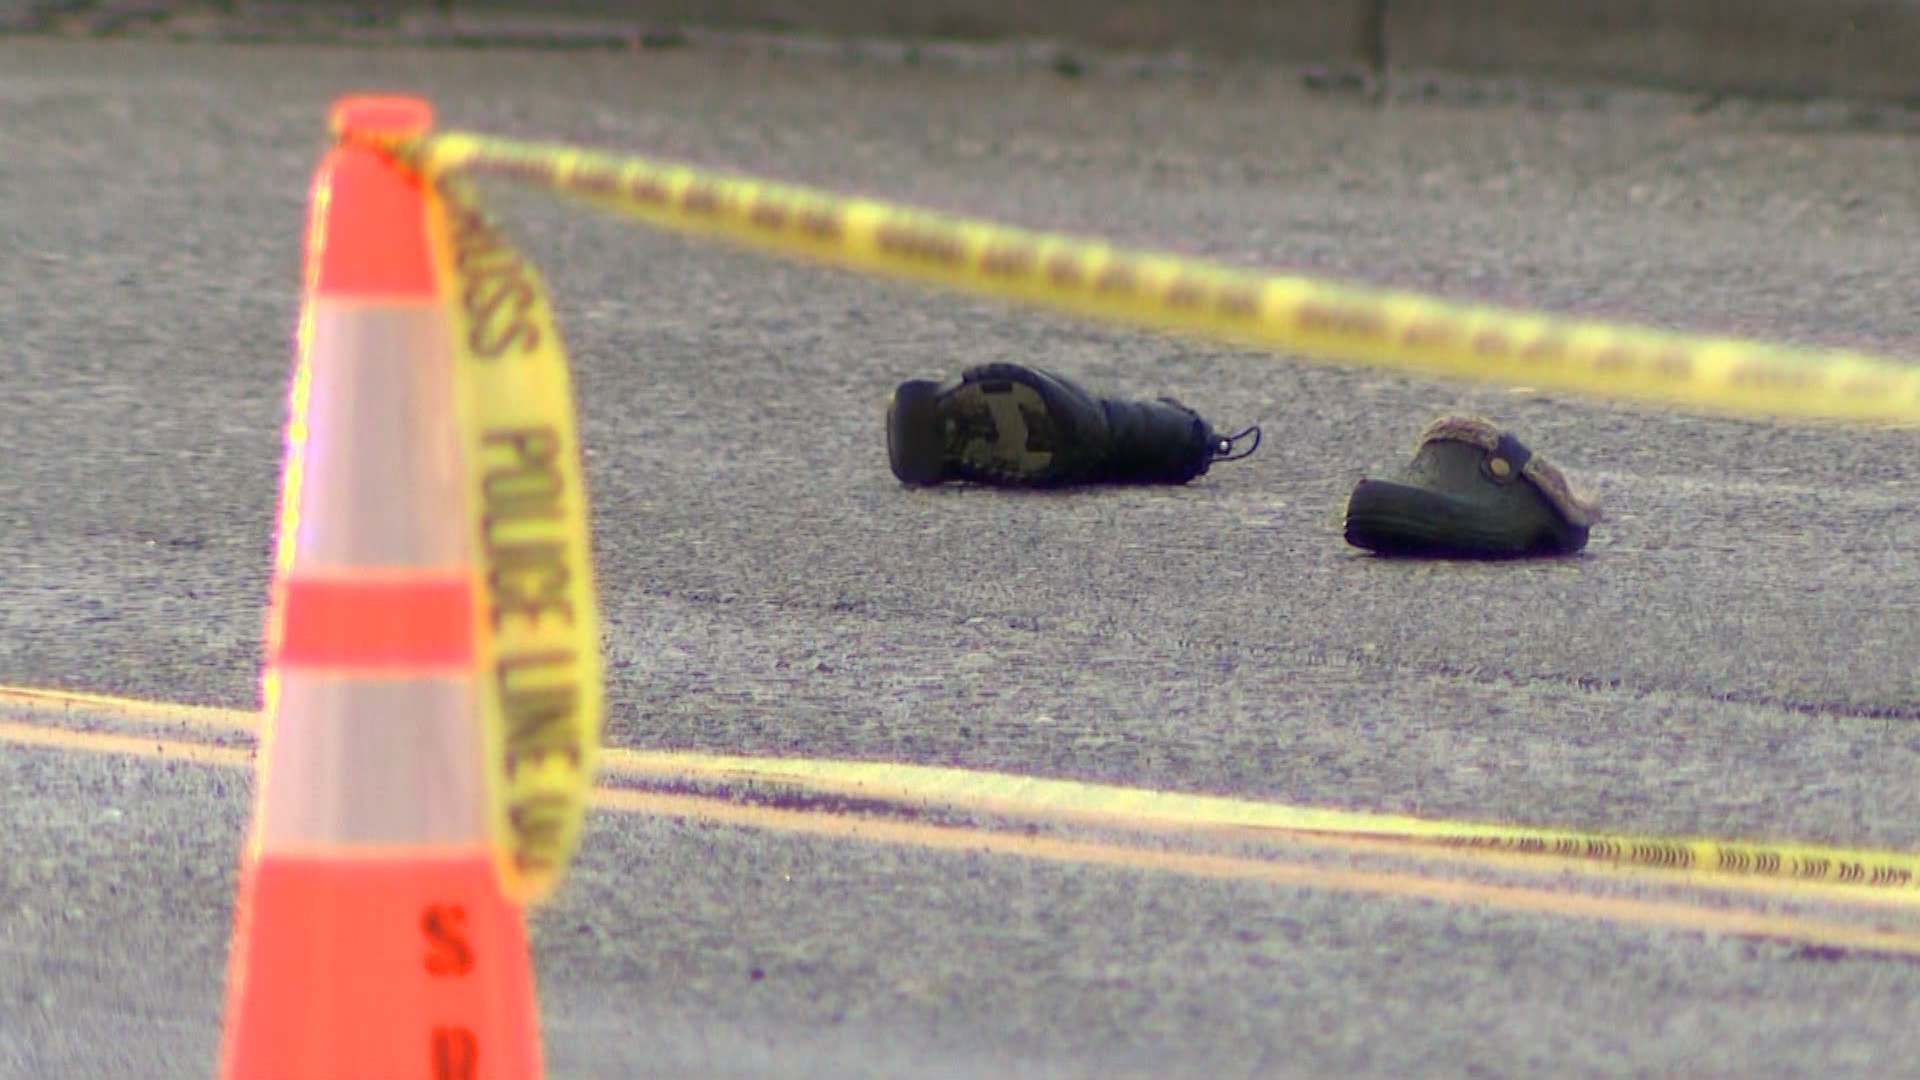 A woman in her 60's was hit and killed by a vehicle in Seattle's Ballard neighborhood Friday morning